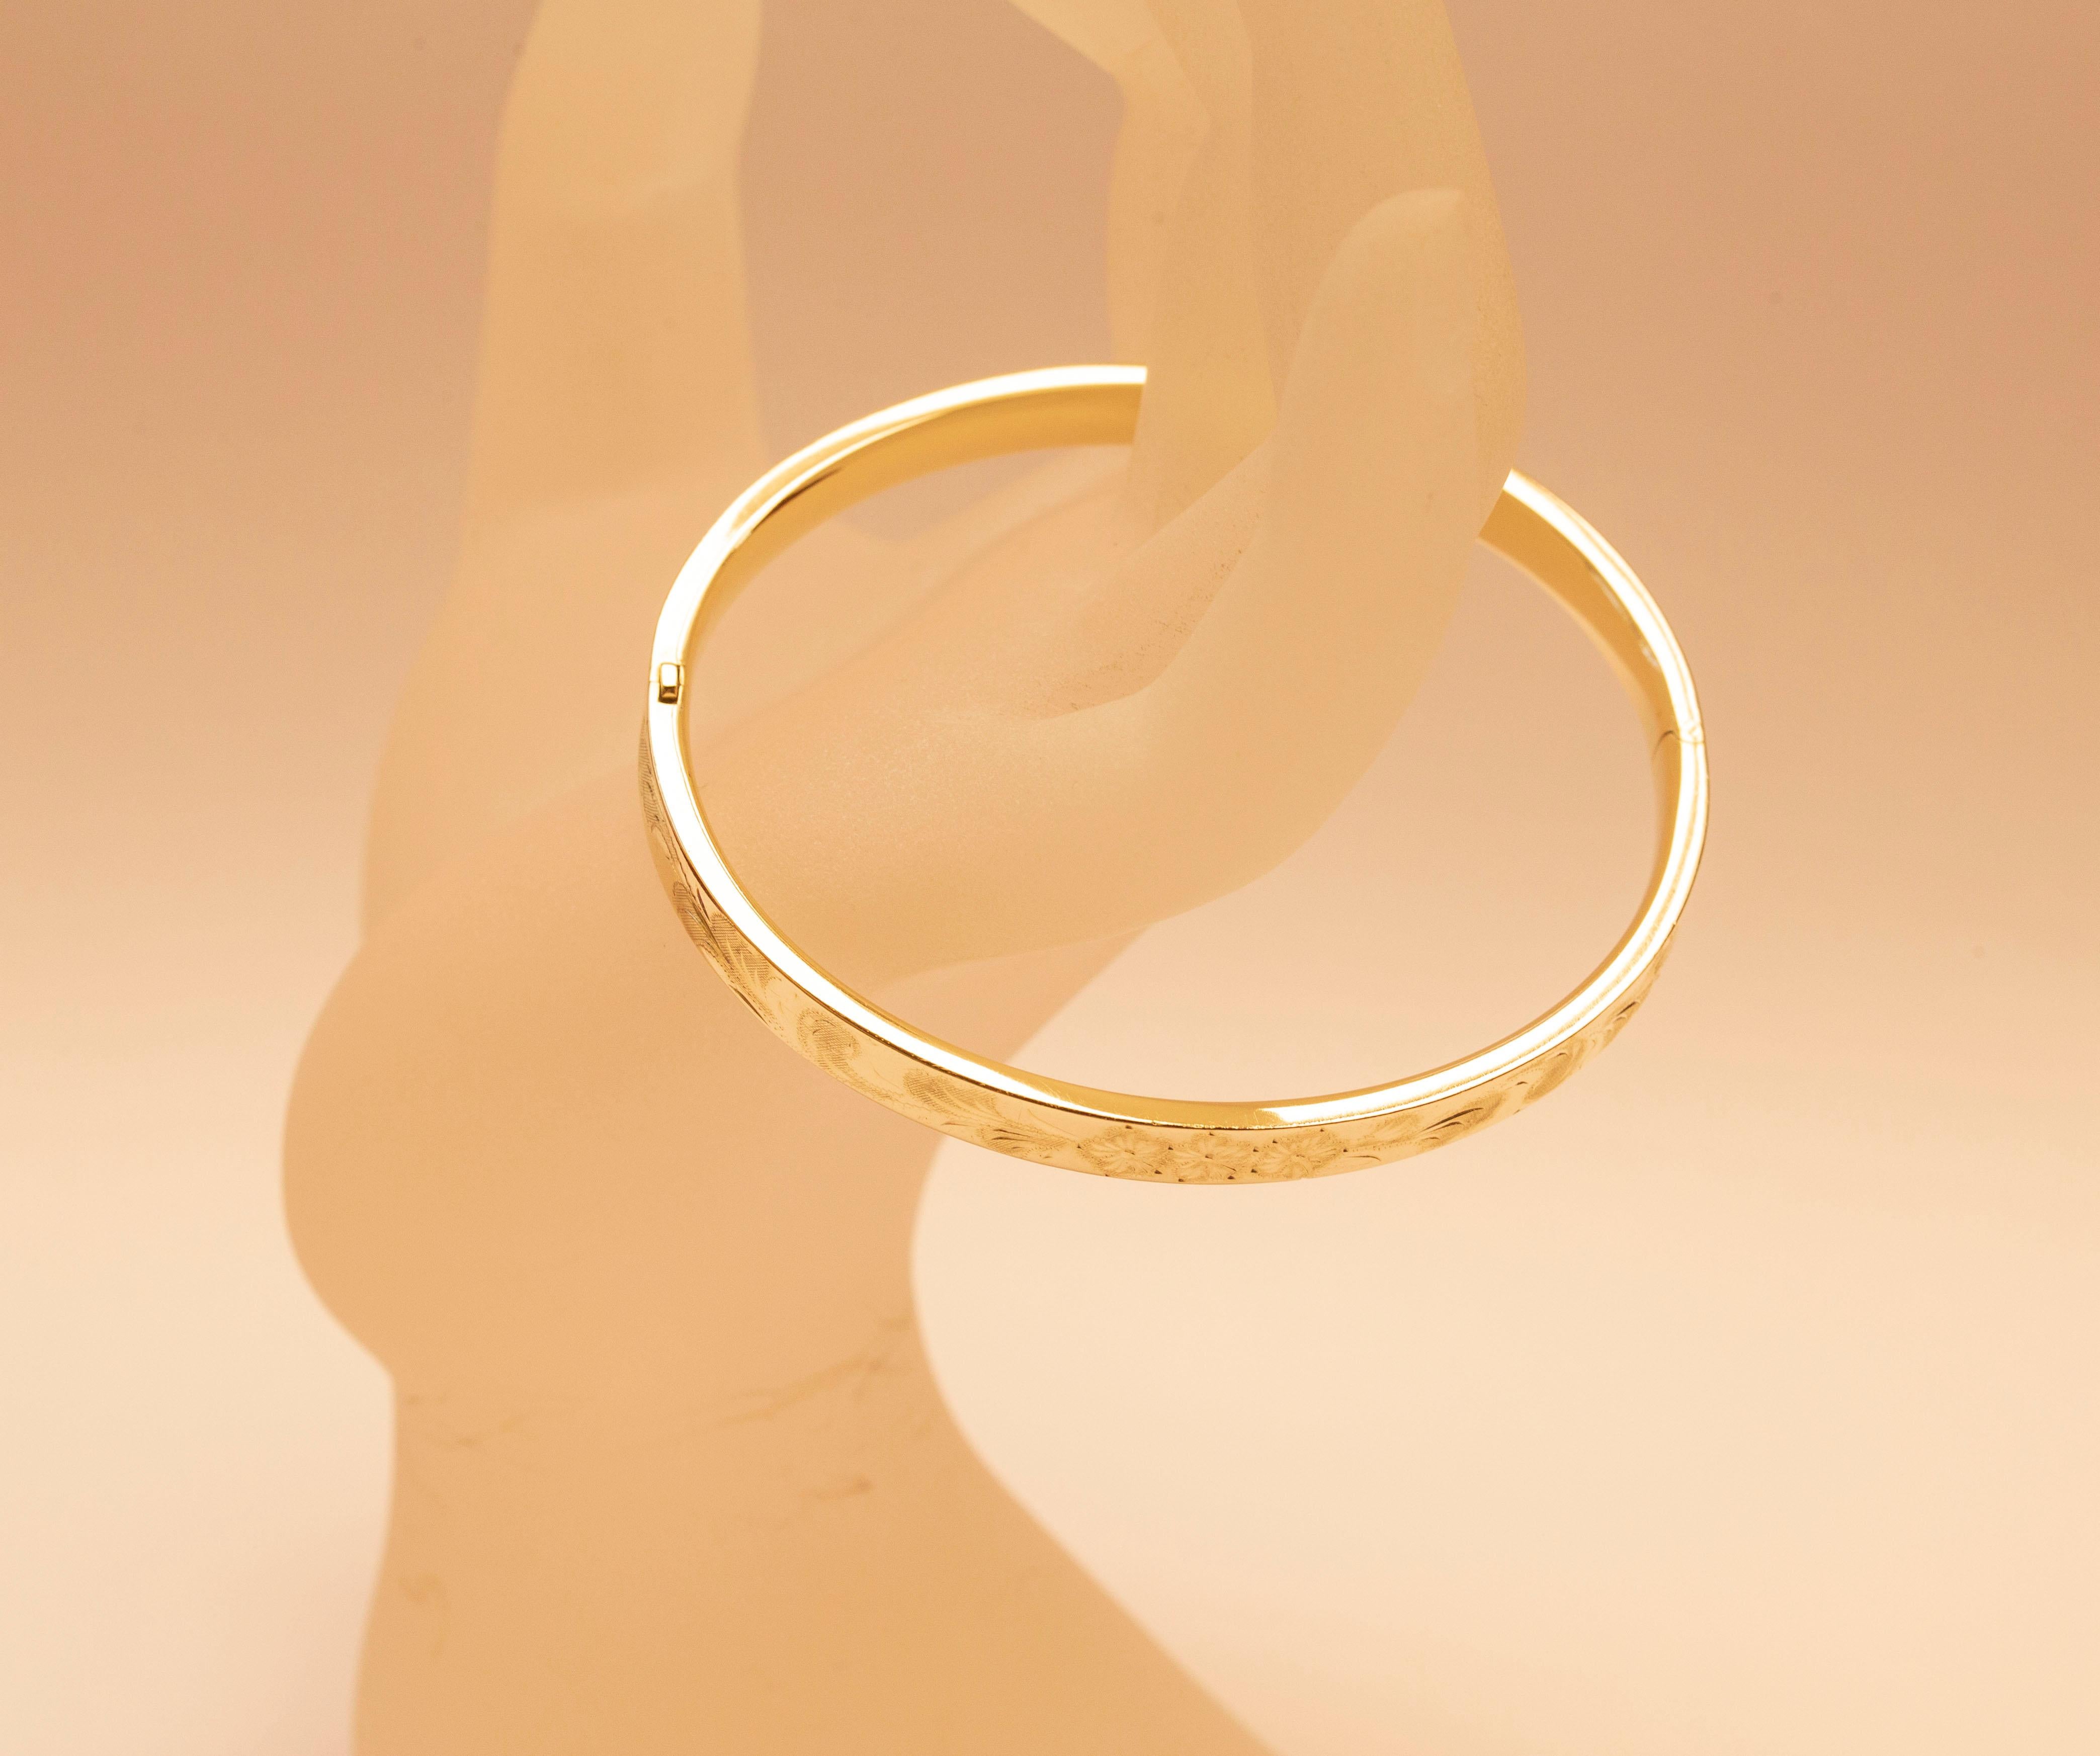 A vintage 14 karat solid yellow gold bangle bracelet with engraved floral and leaf decoration. The bracelet was made in the 1960s. The item features a retro vibe that can be matched with classy as well as modern outfits. The bracelet is in very good